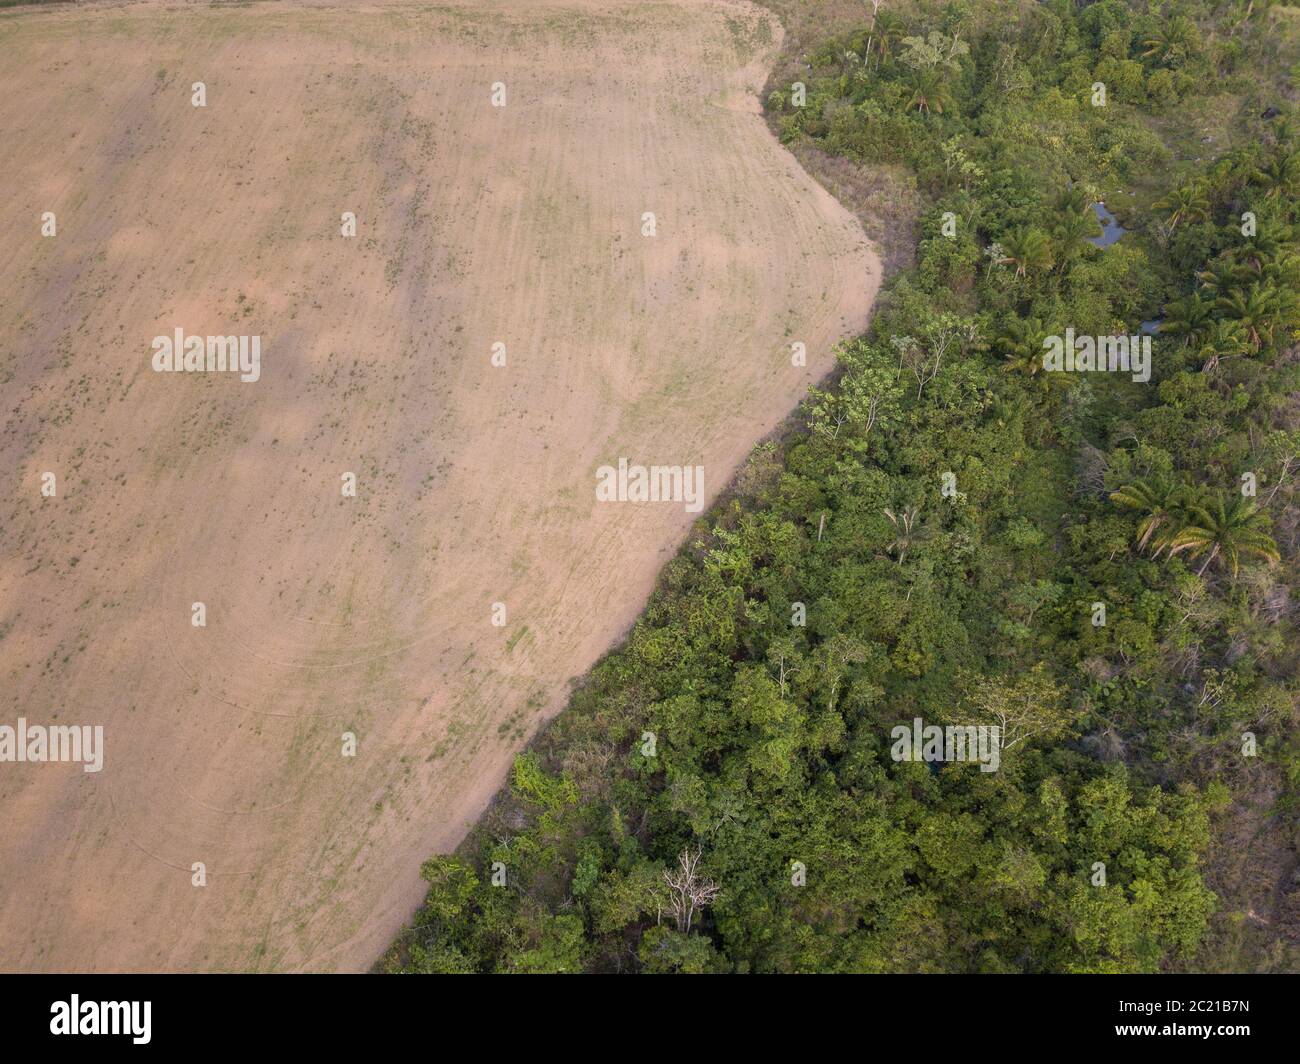 Drone aerial view of deforestation in soy agriculture farm and forest trees in the Amazon rainforest, Brazil. Concept of ecology, carbon footprint. Stock Photo